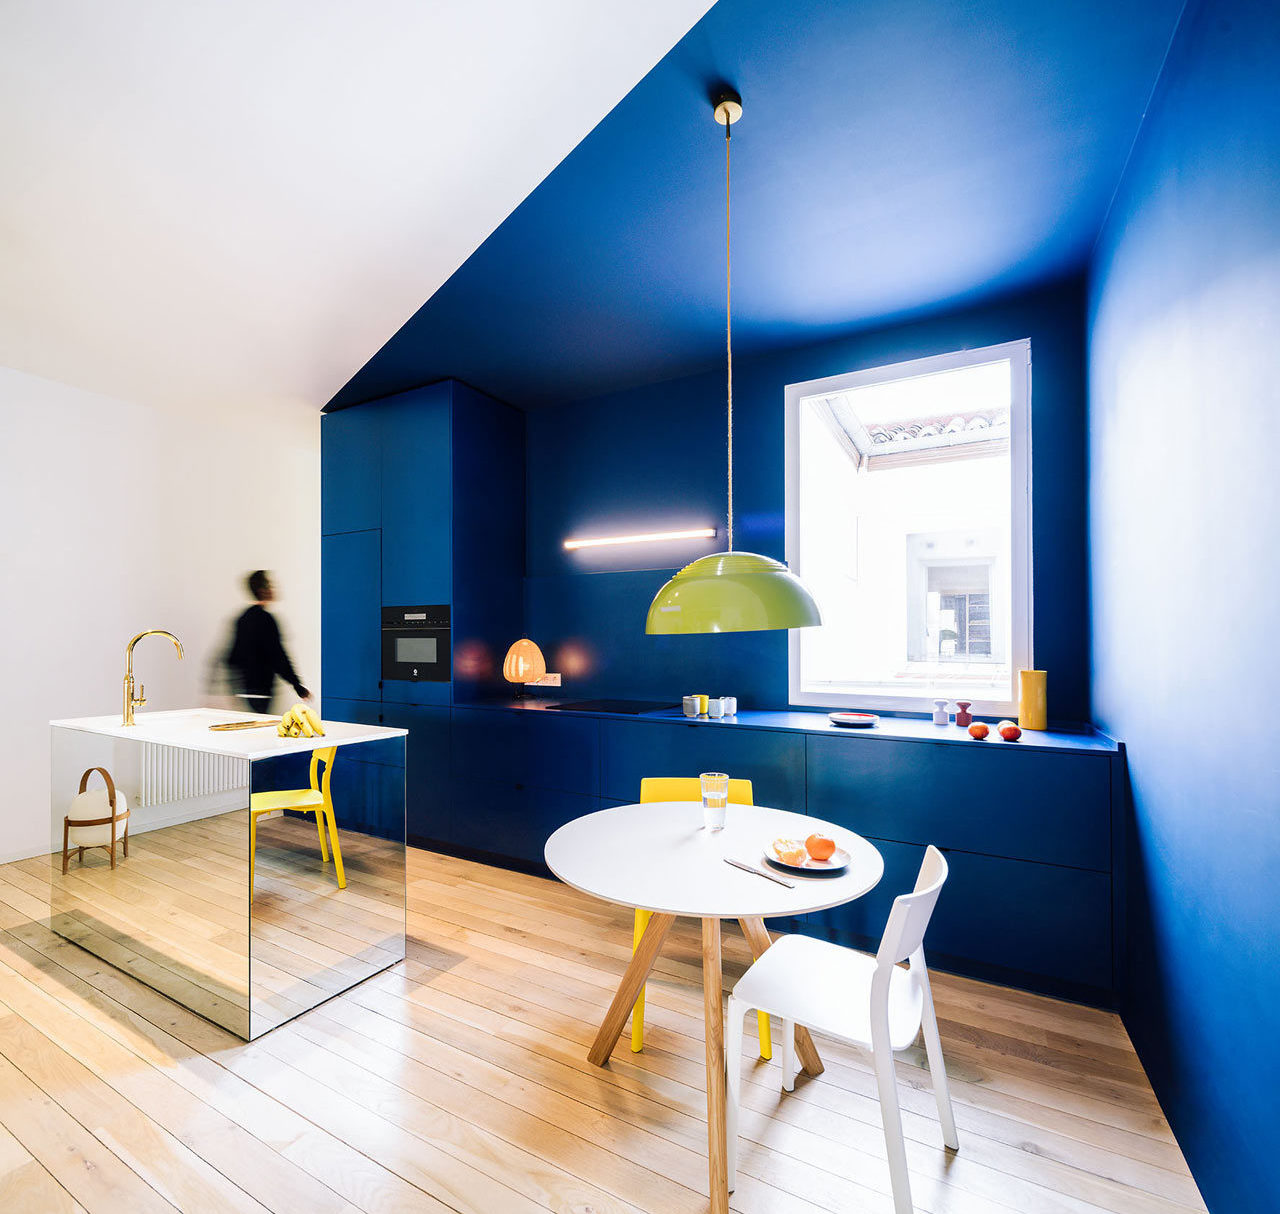 sequencehouse: A 124-Square-Meter Flat in Madrid Filled with Primary Colors